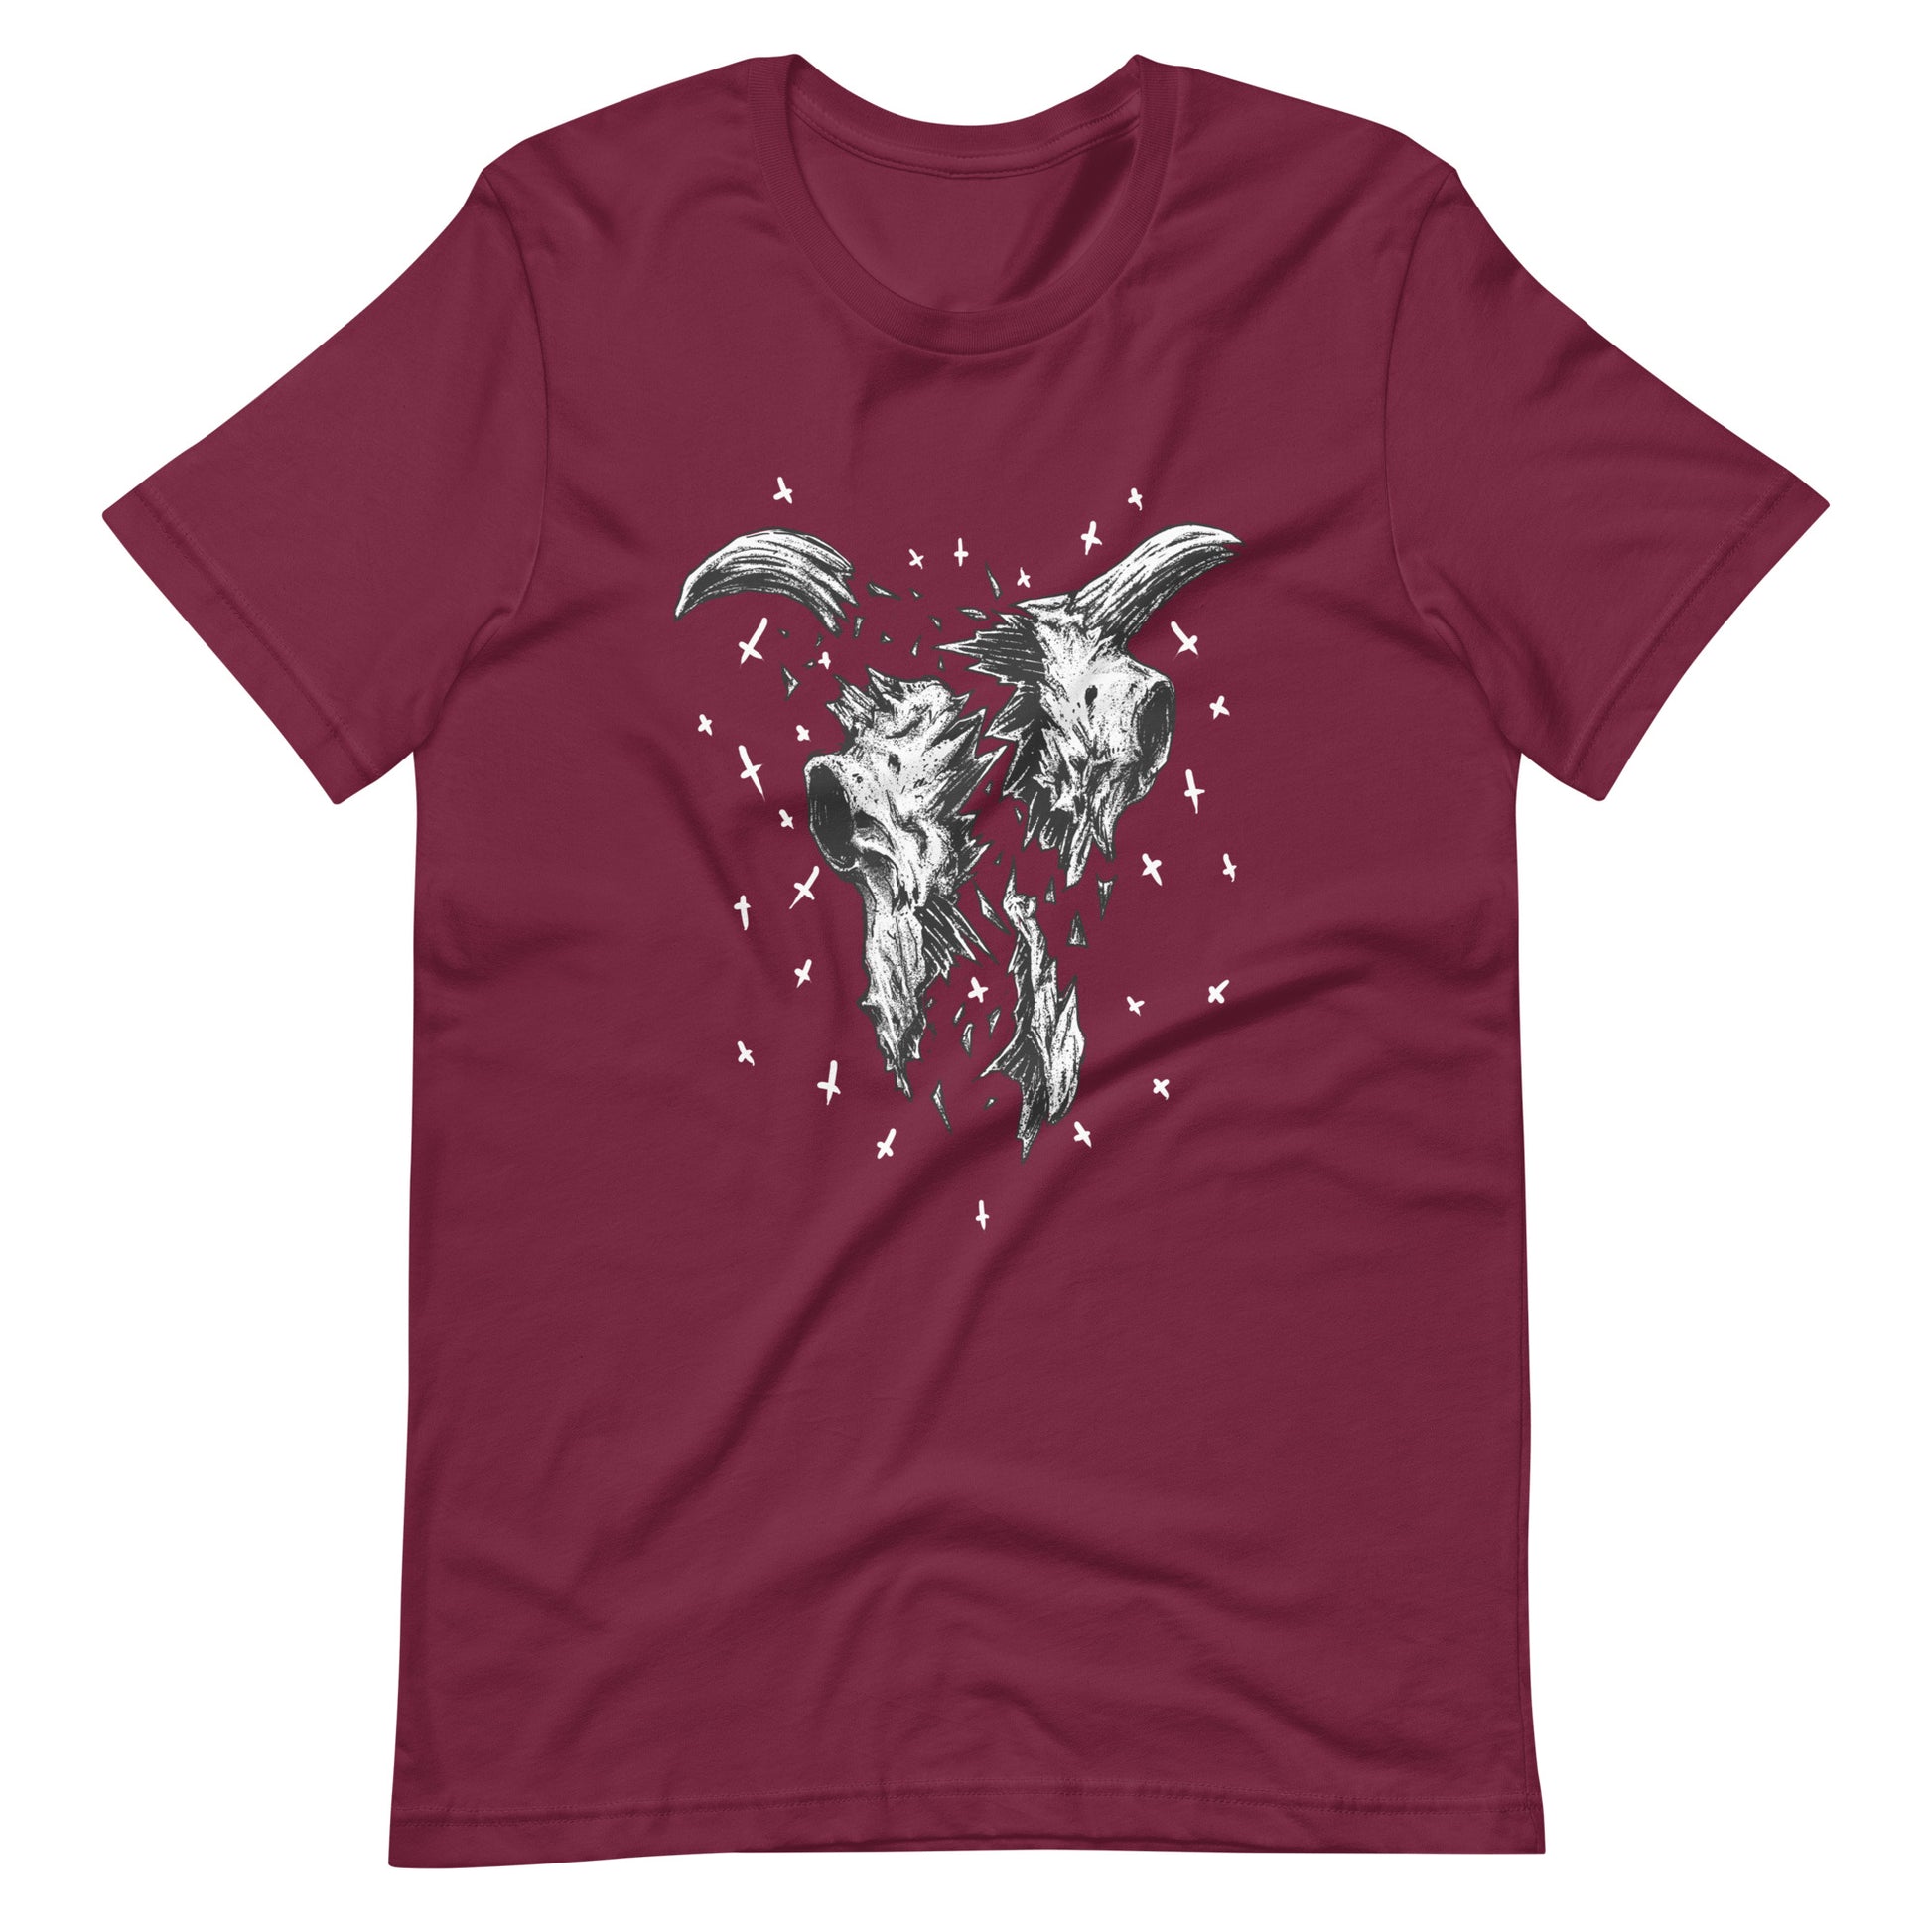 Crushed - Men's t-shirt - Maroon Front